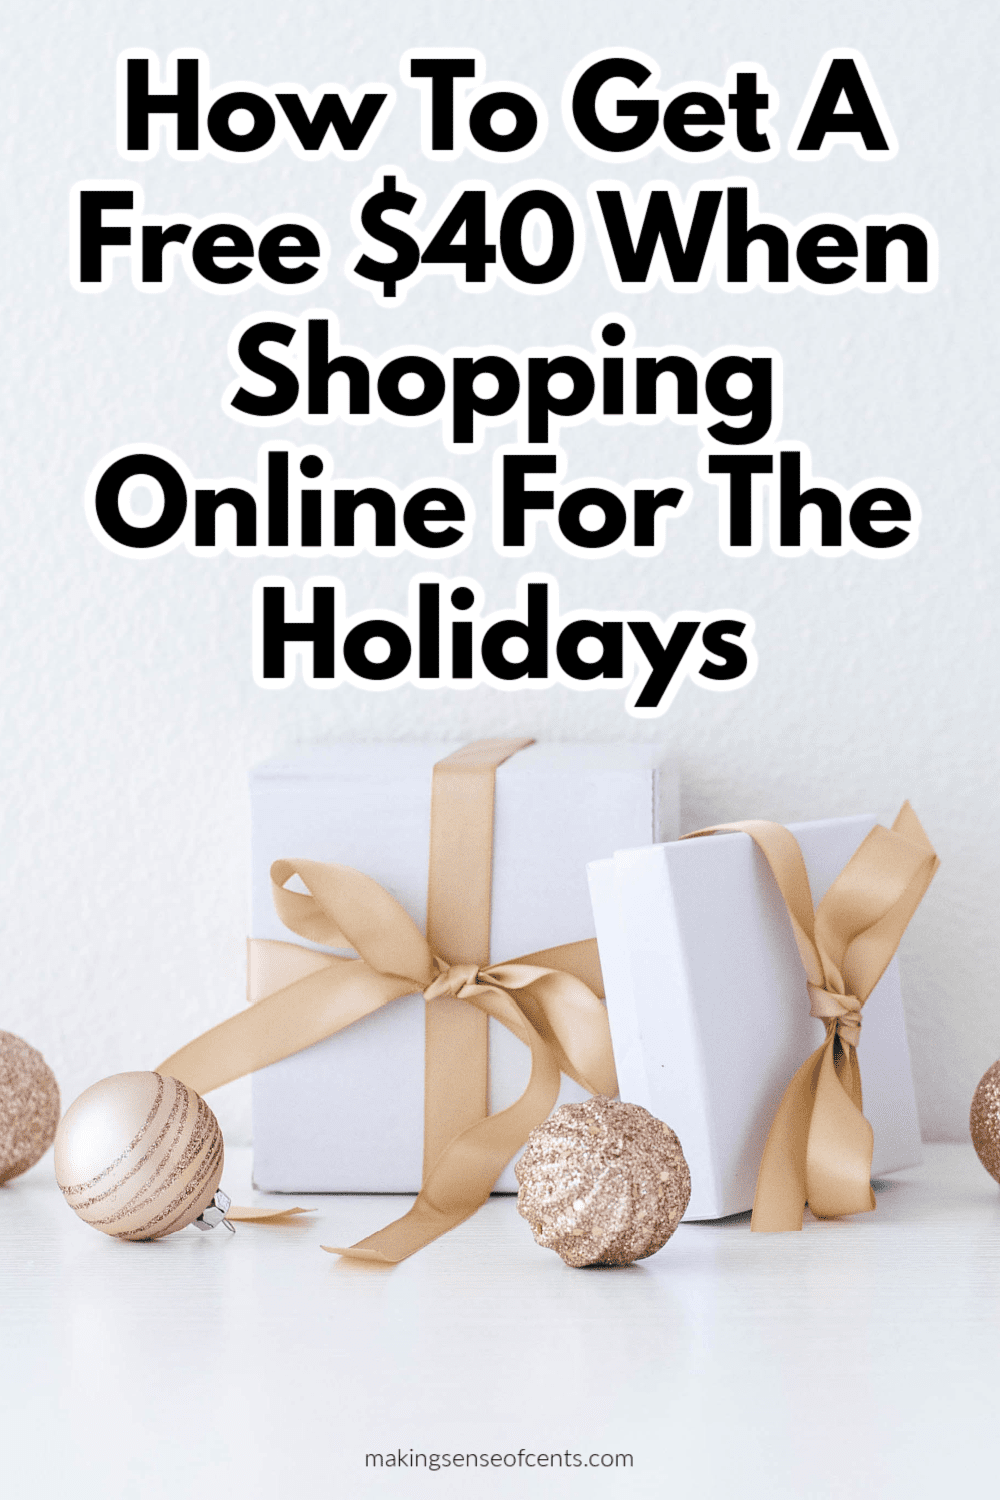 How To Get A Free $40 When Shopping Online For The Holidays